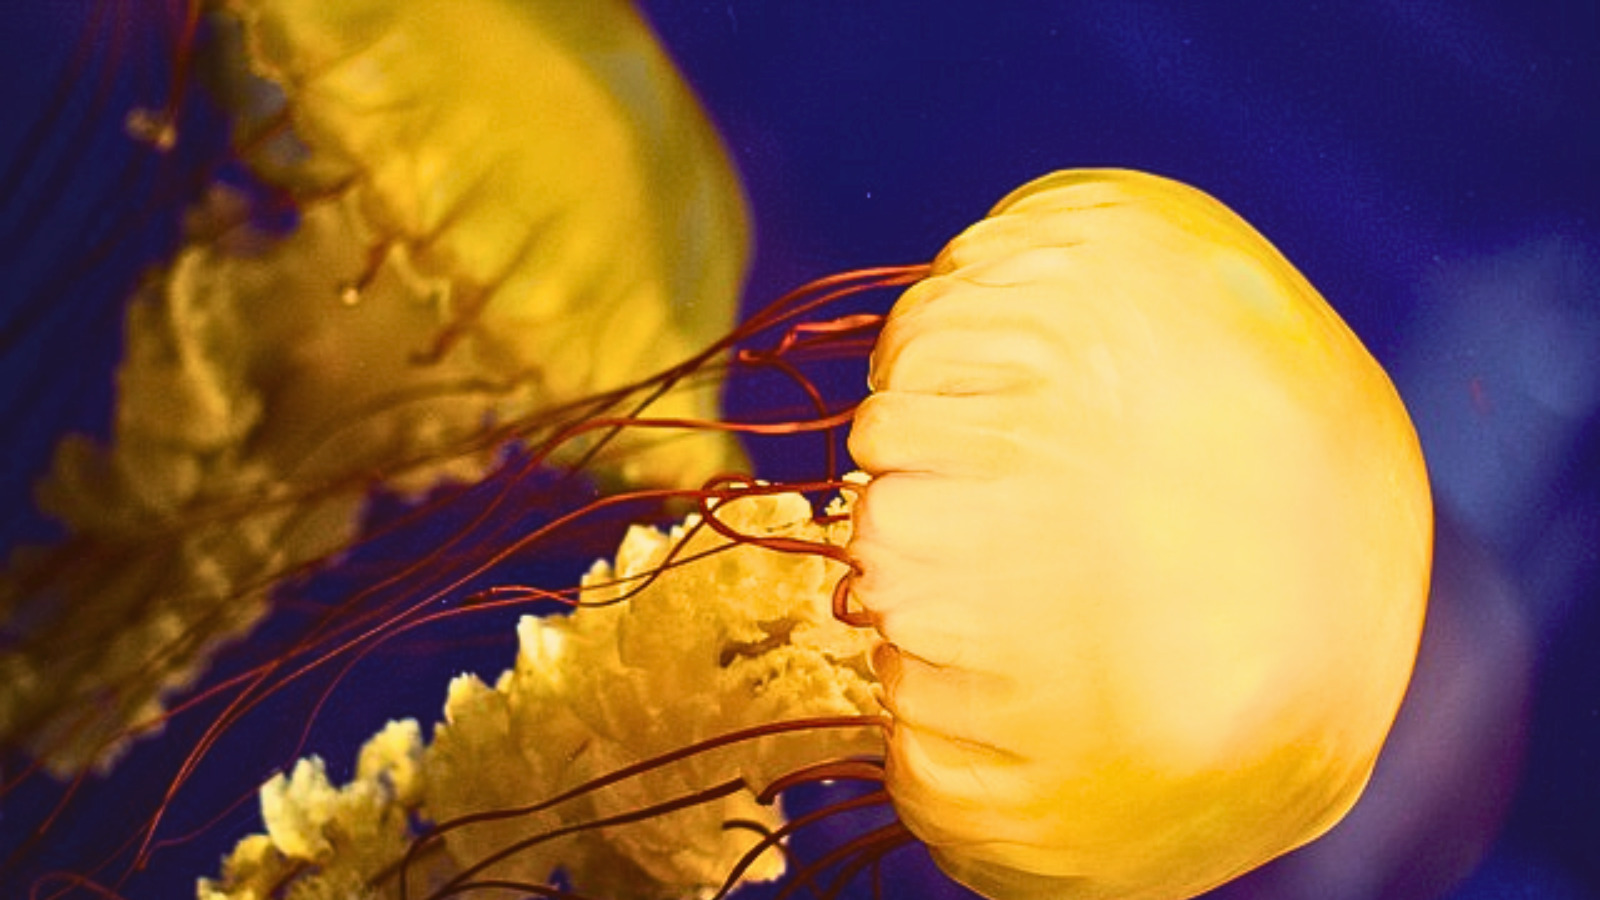 Does Jellyfish Have Brain, Heart, Bones & Eyes? Learning process